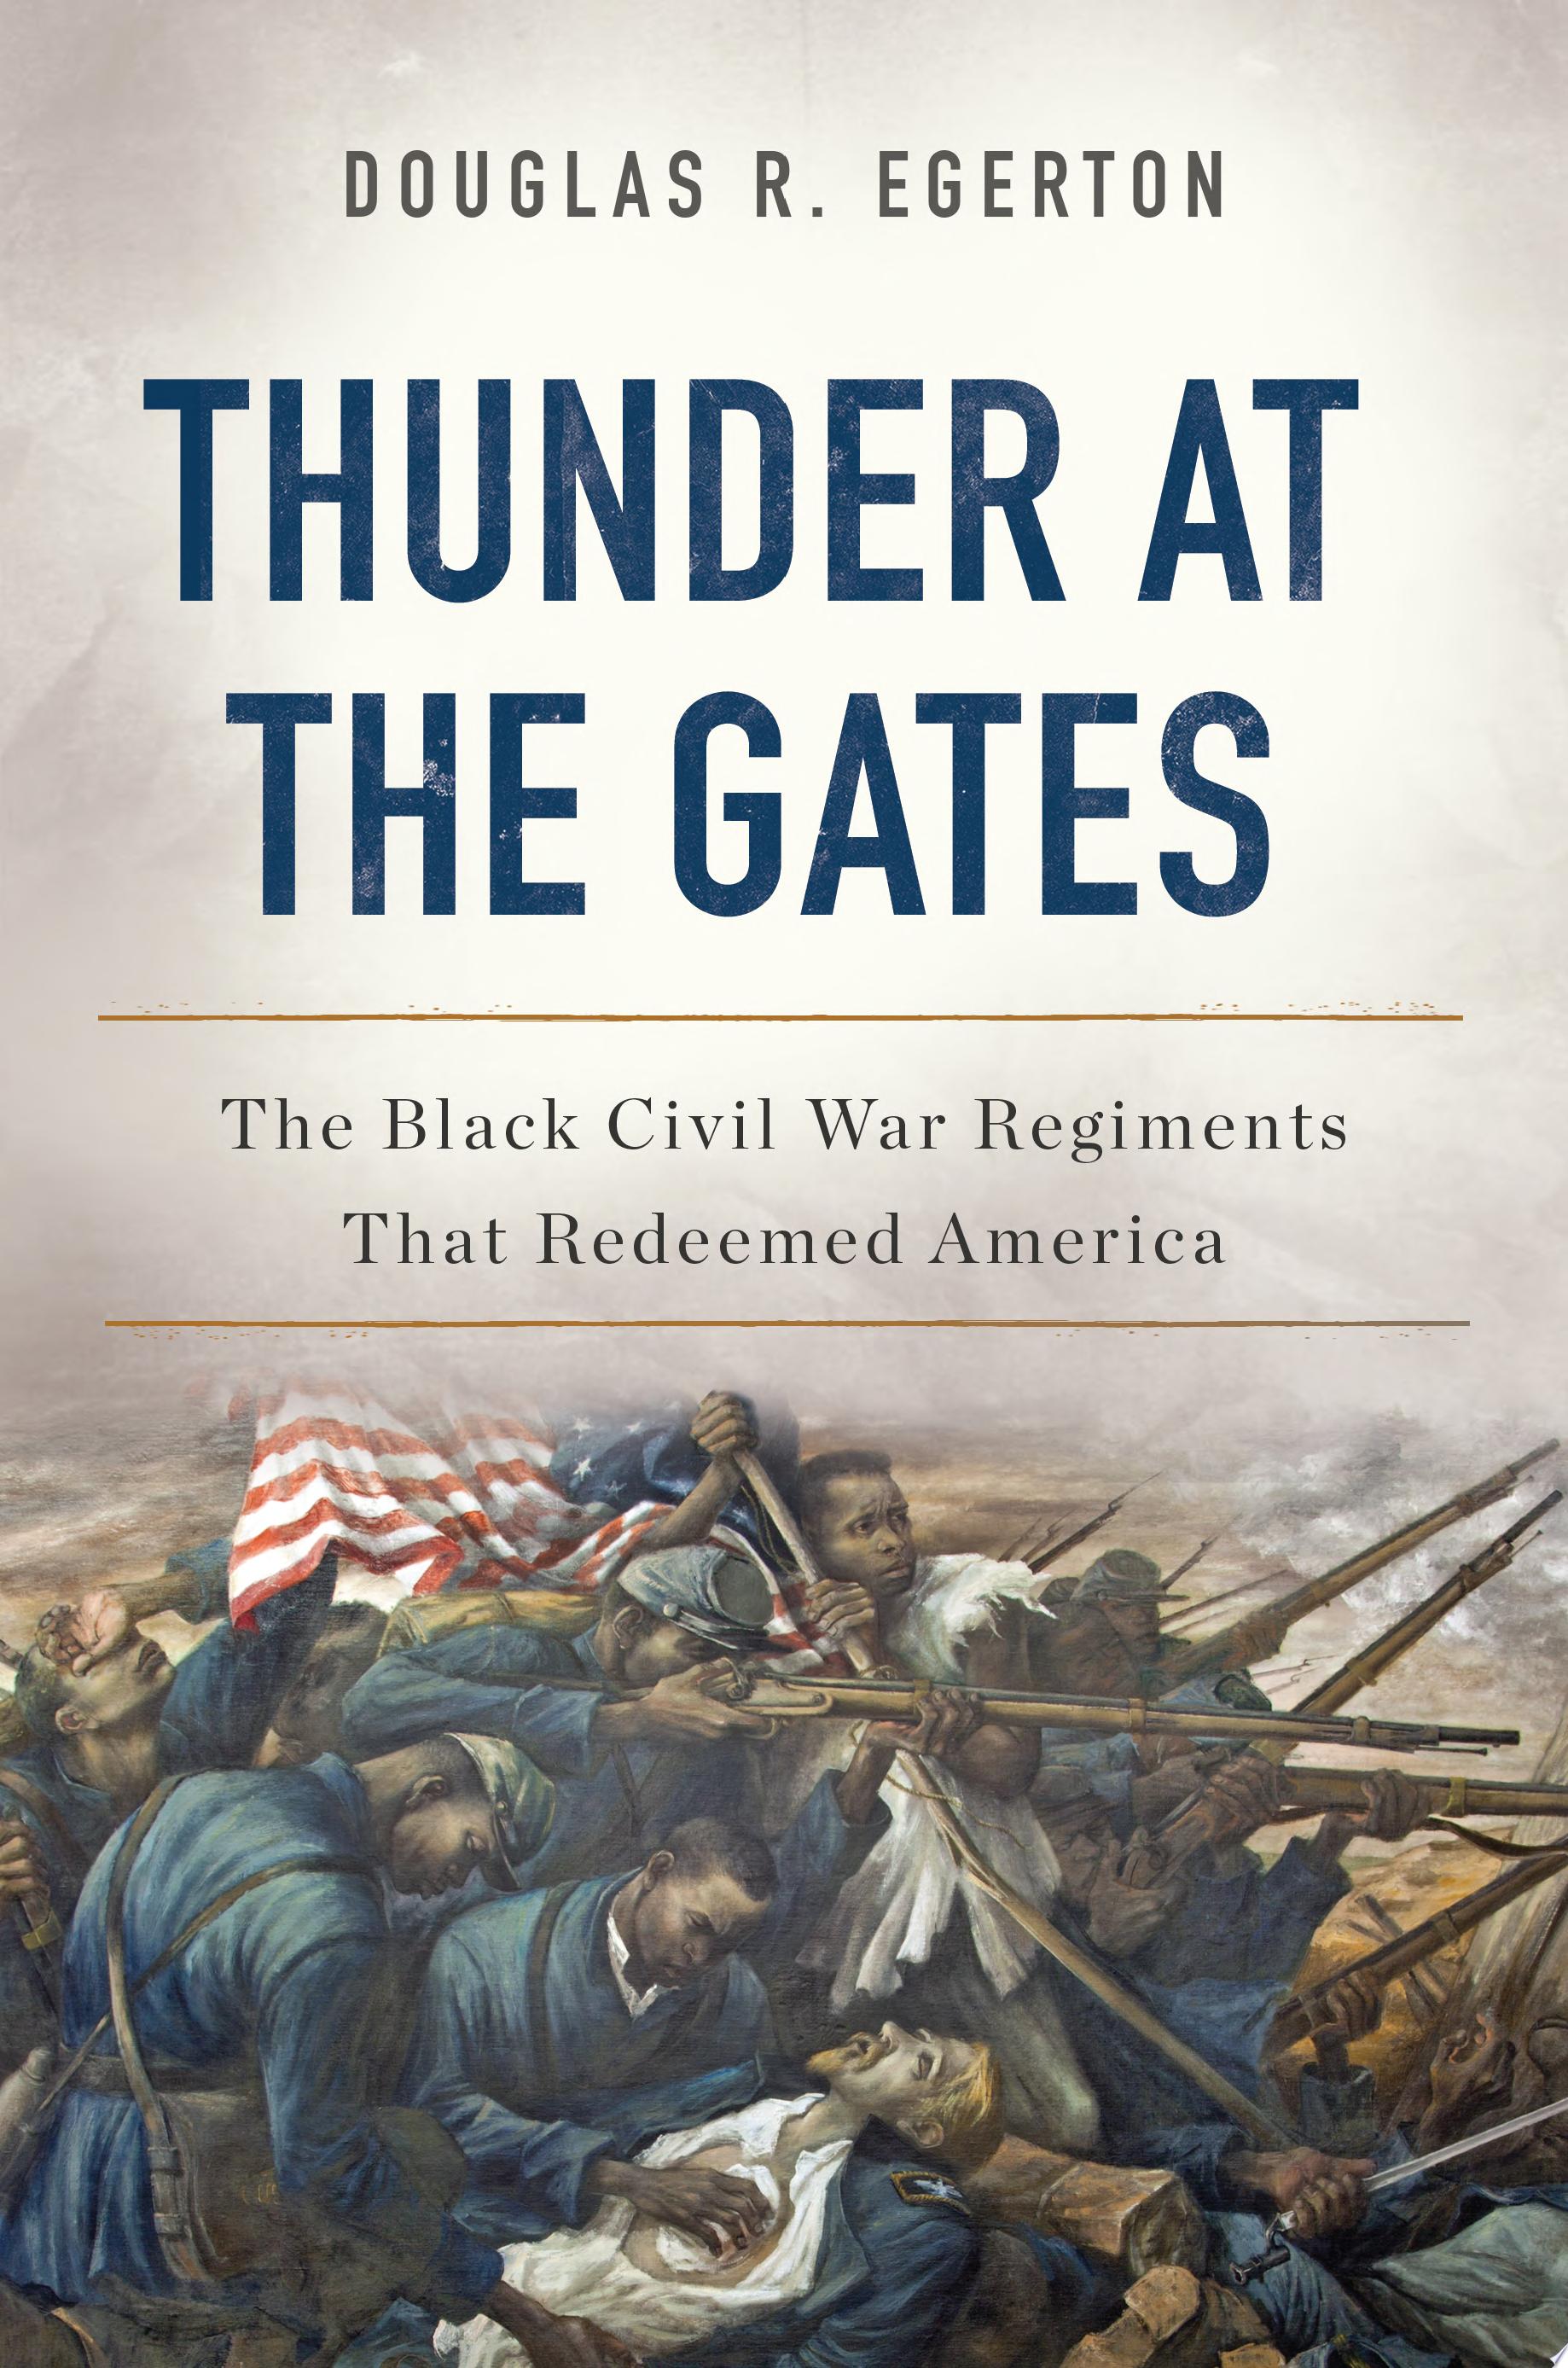 Image for "Thunder at the Gates"